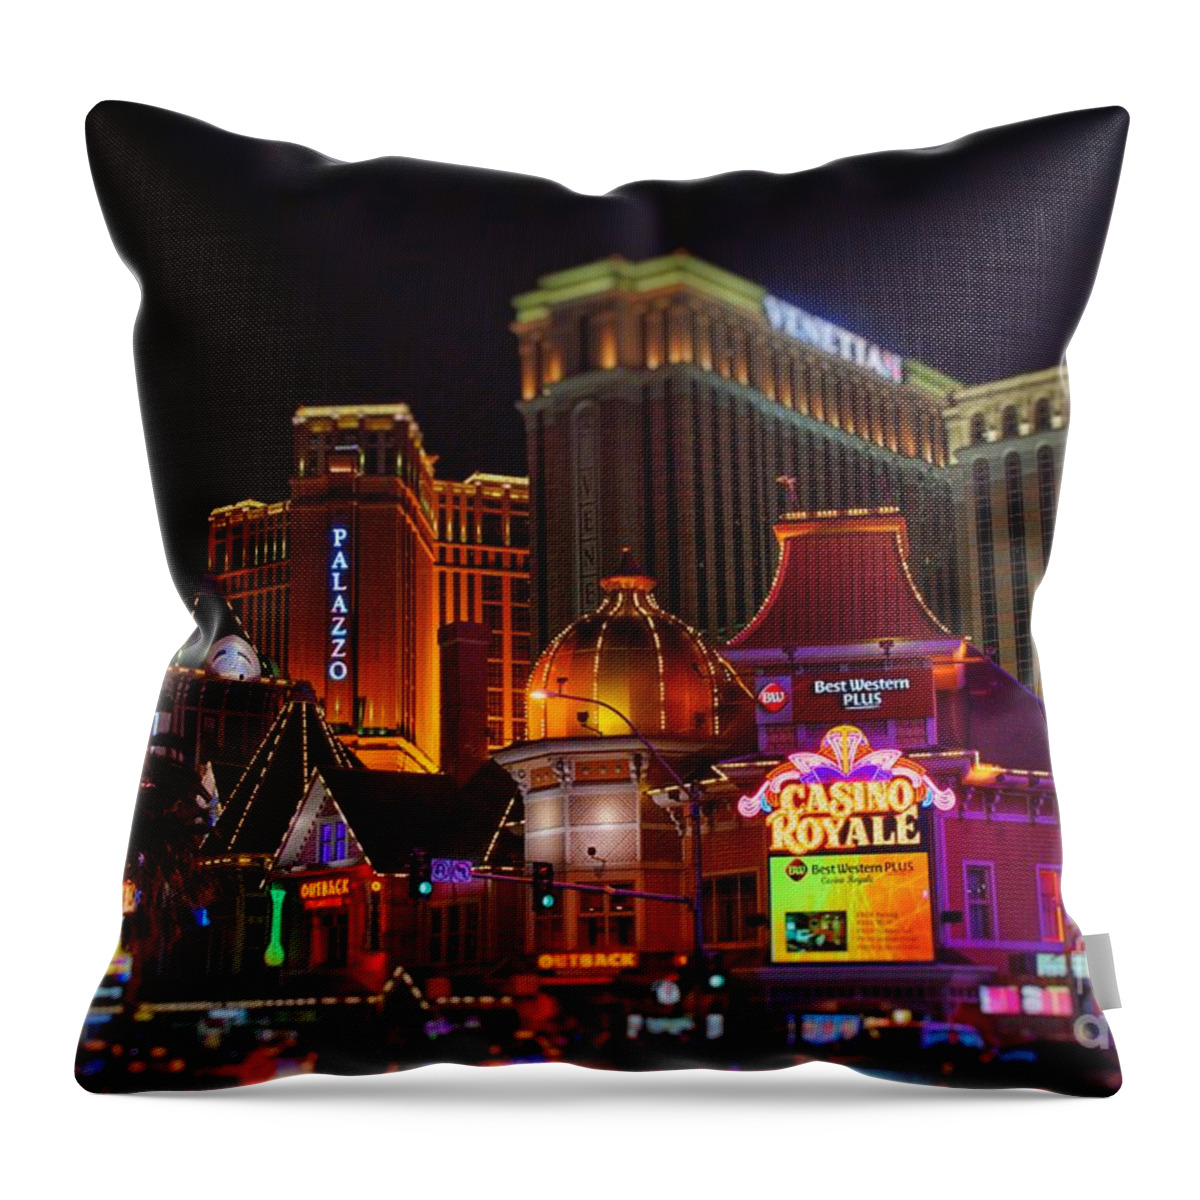  Throw Pillow featuring the photograph Dreamscapes in Vegas by Rodney Lee Williams